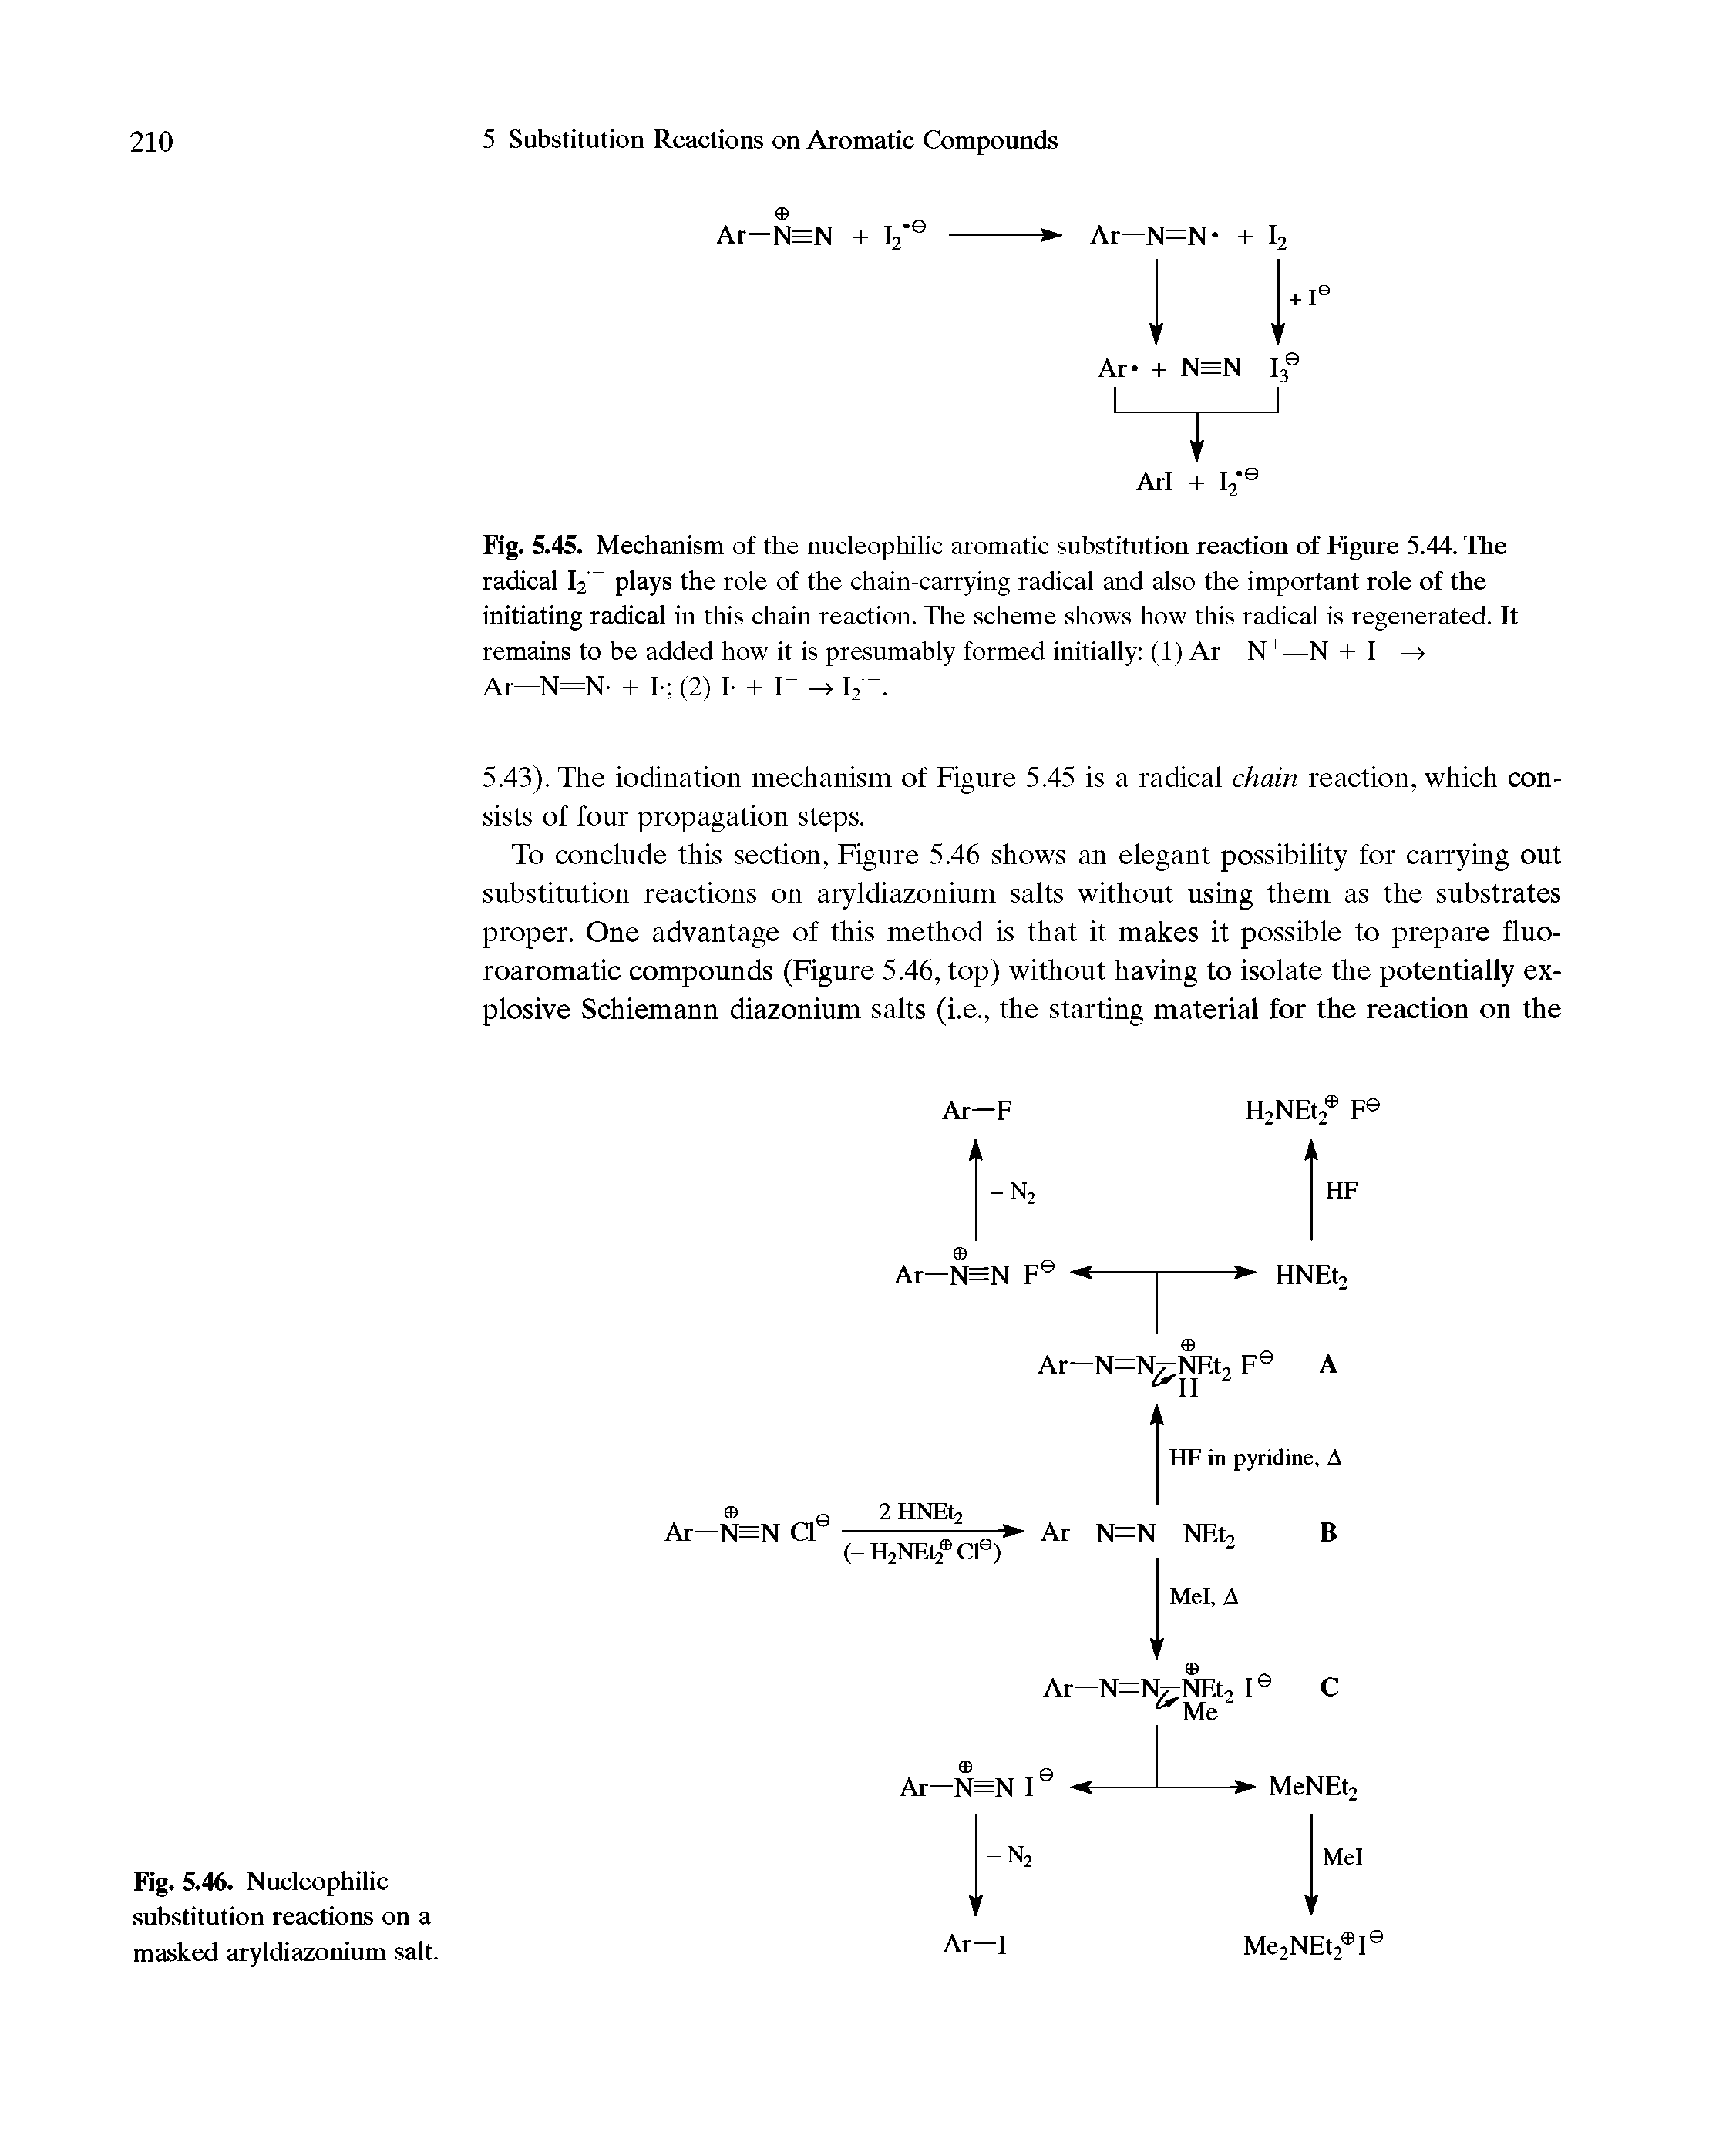 Fig. 5.45. Mechanism of the nucleophilic aromatic substitution reaction of Figure 5.44. The radical I2 plays the role of the chain-carrying radical and also the important role of the initiating radical in this chain reaction. The scheme shows how this radical is regenerated. It remains to be added how it is presumably formed initially (1) Ar—N+=N + I- ->...